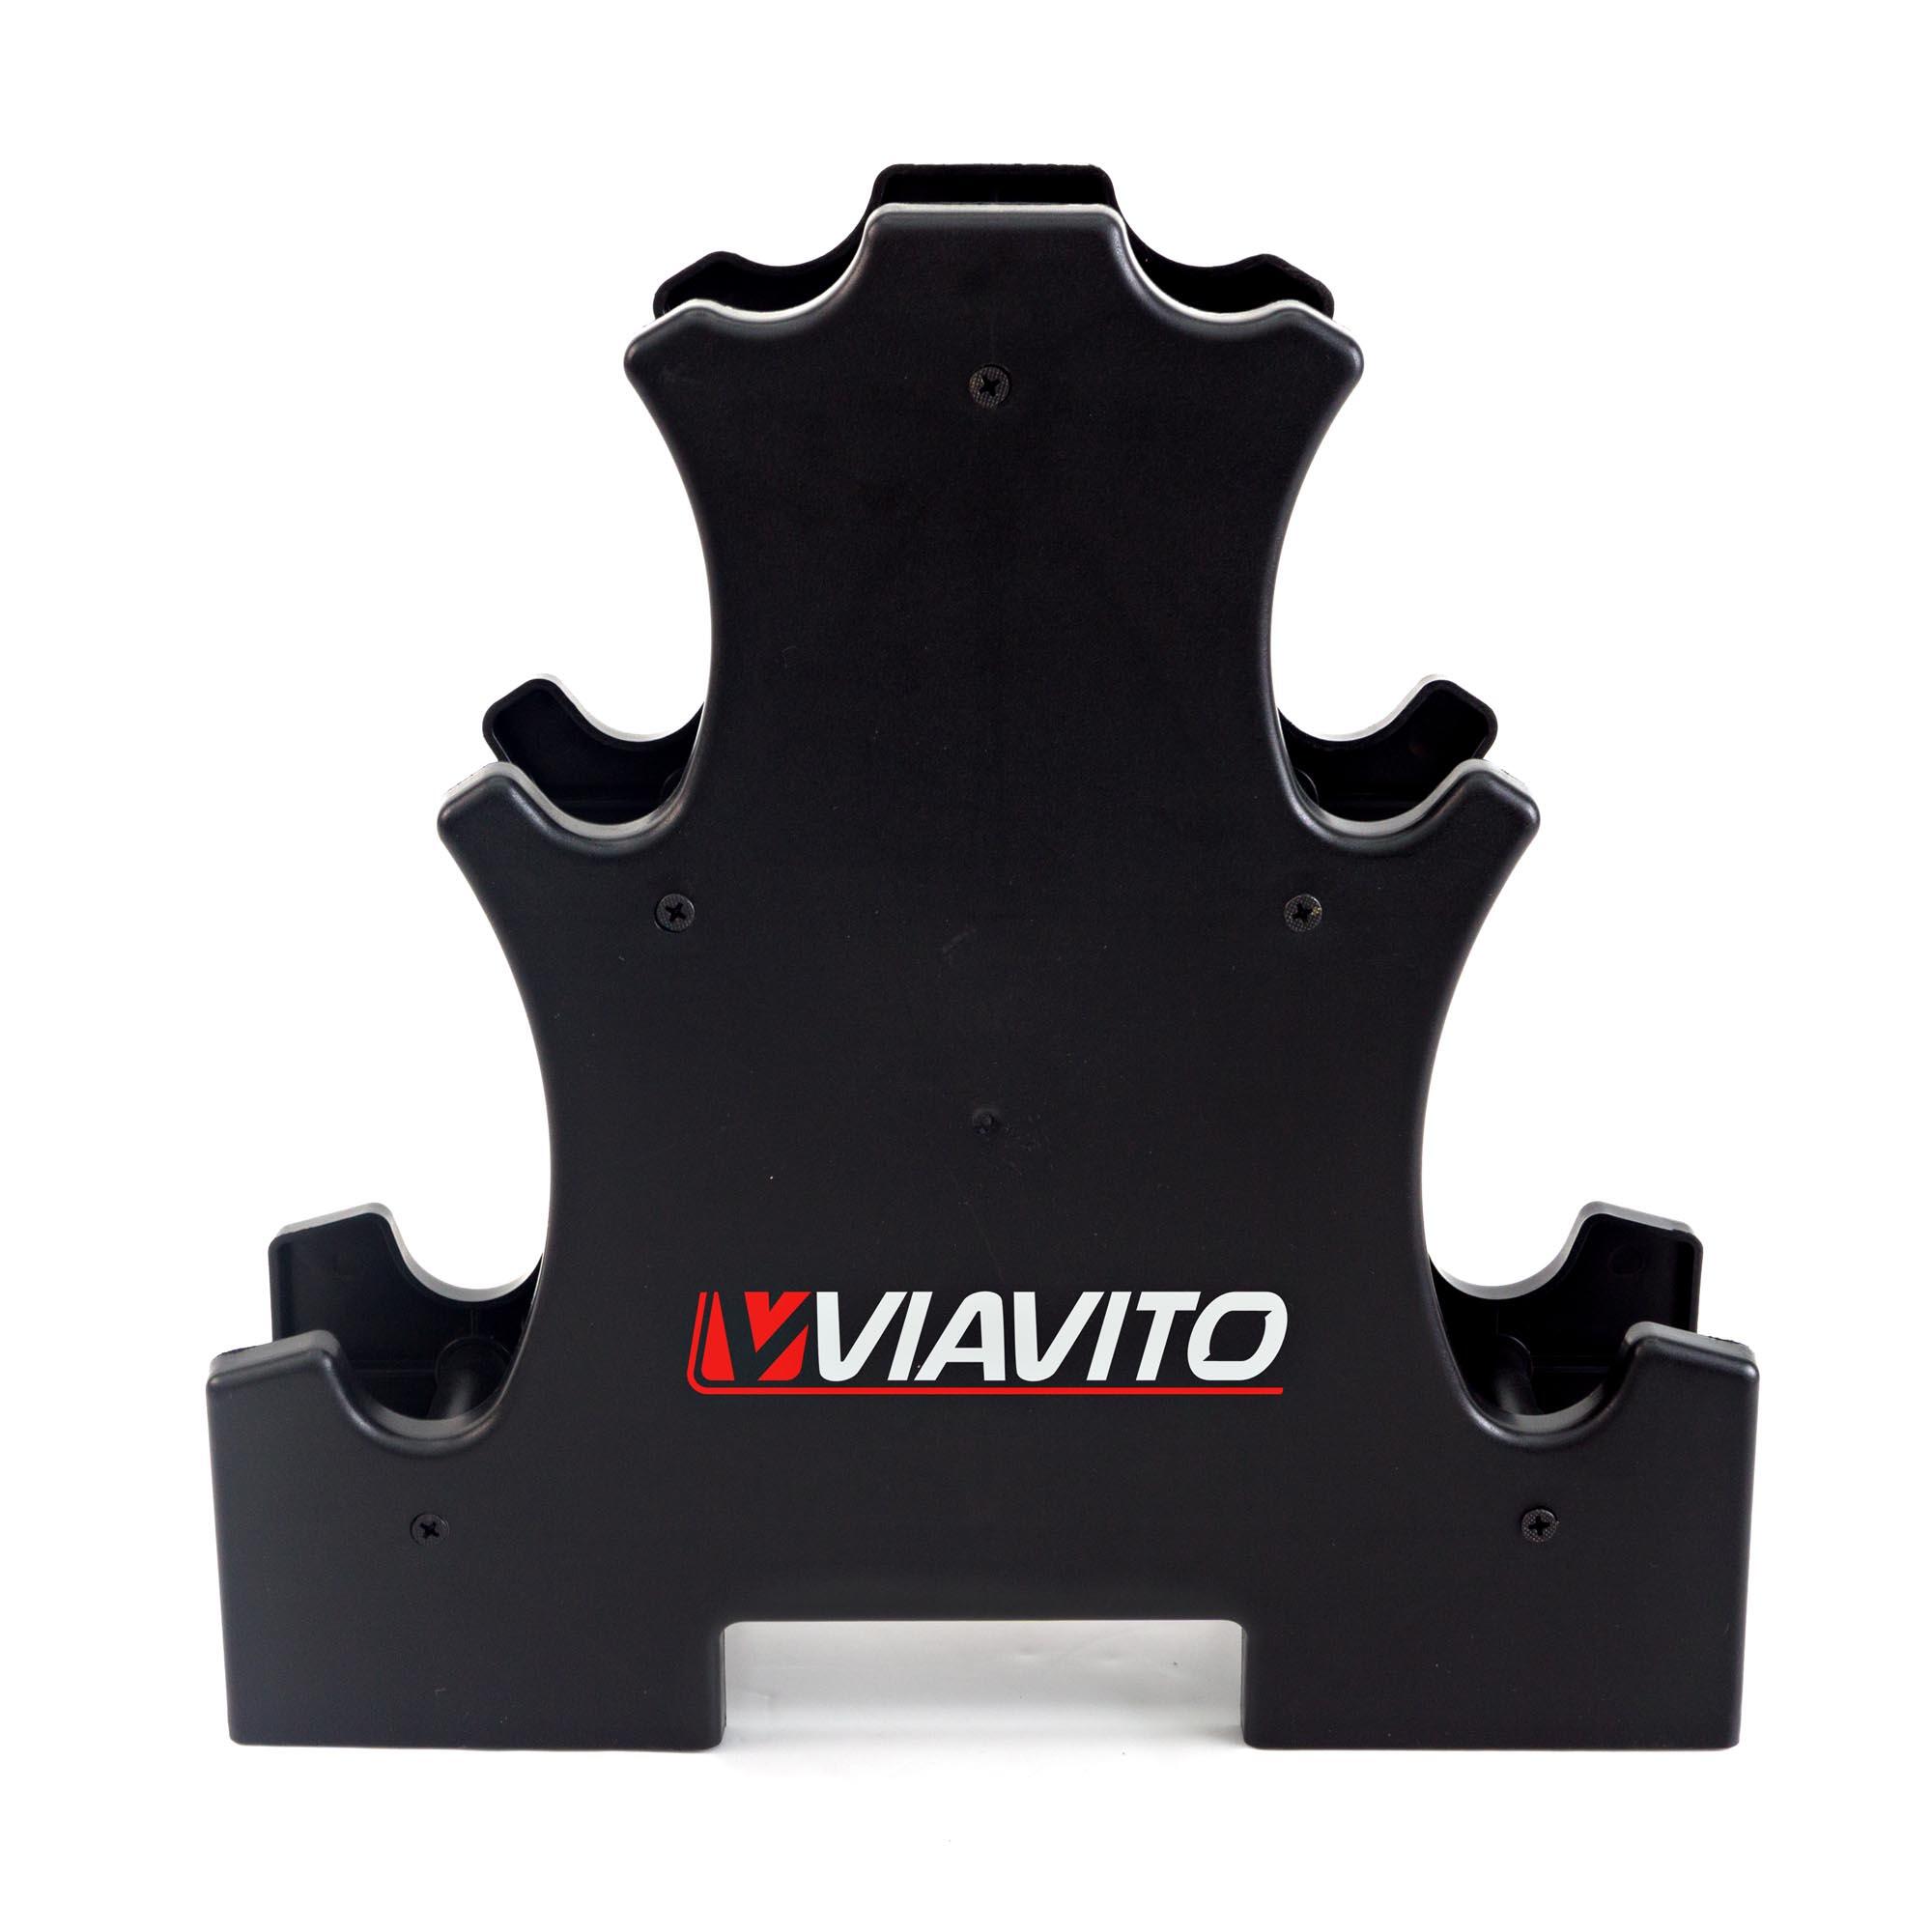 Viavito 12kg Dumbbell Weights Set with Stand 5/6